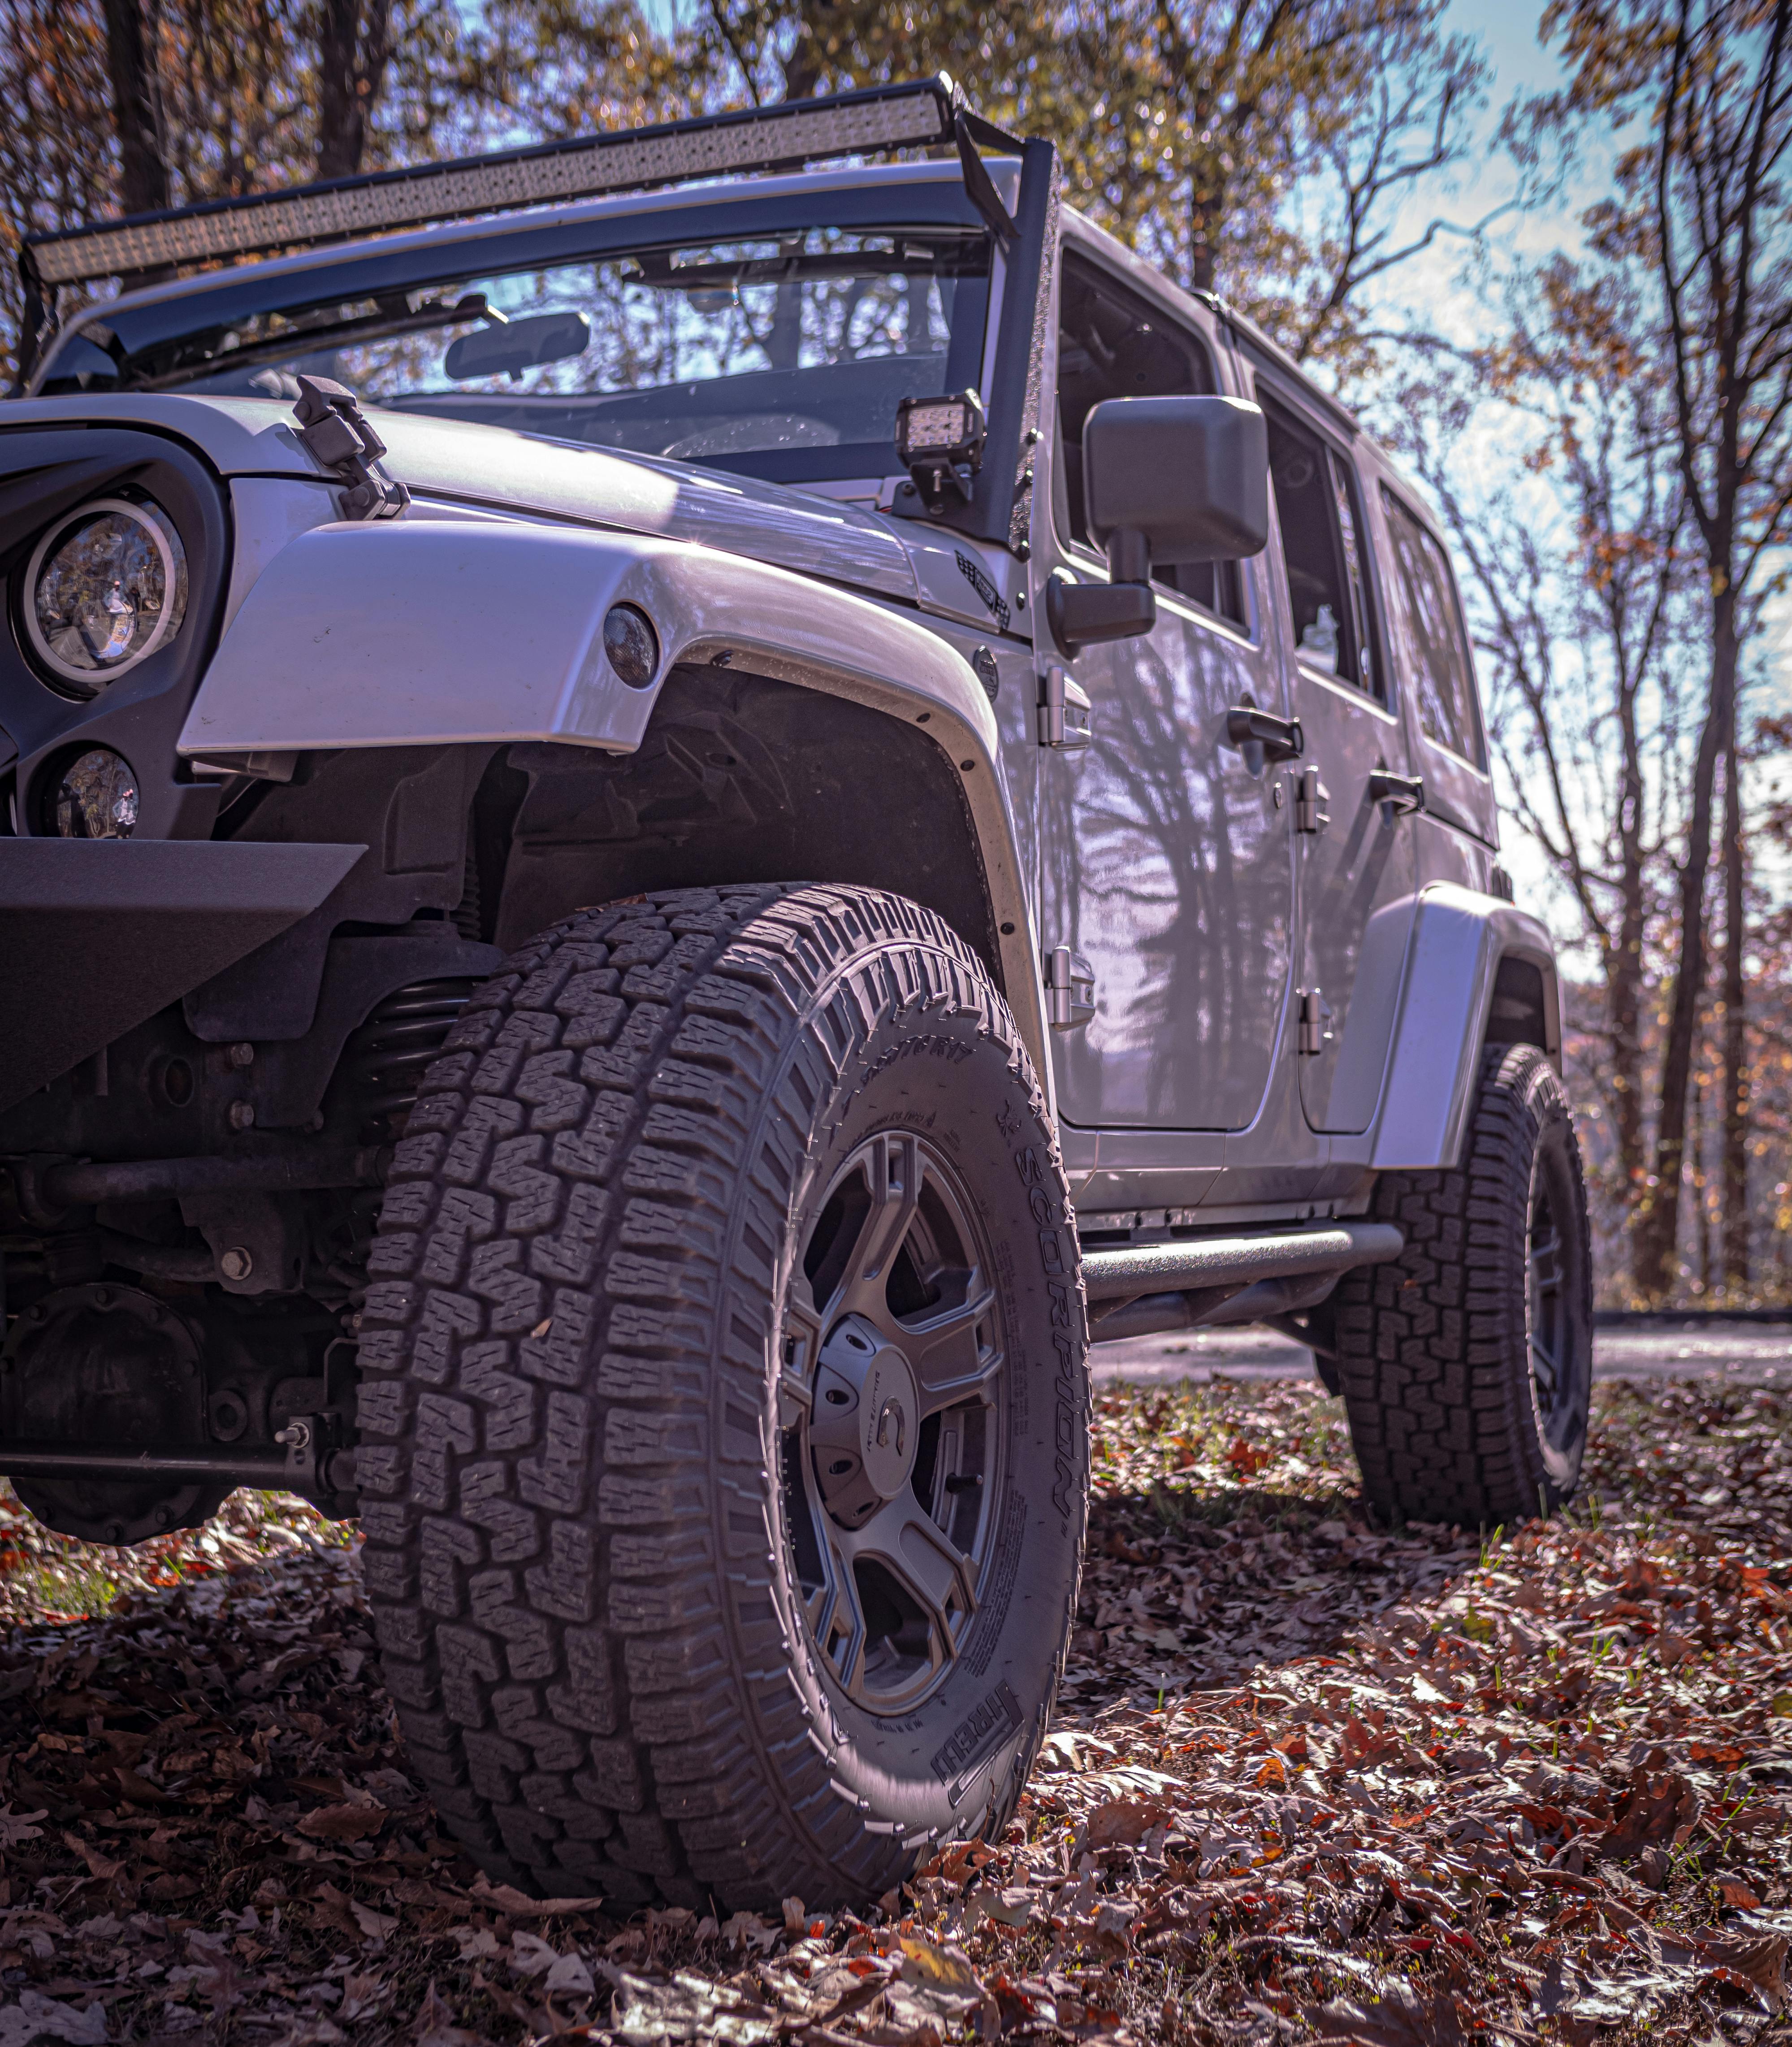 Close-Up Shot of a Silver Jeep Wrangler · Free Stock Photo